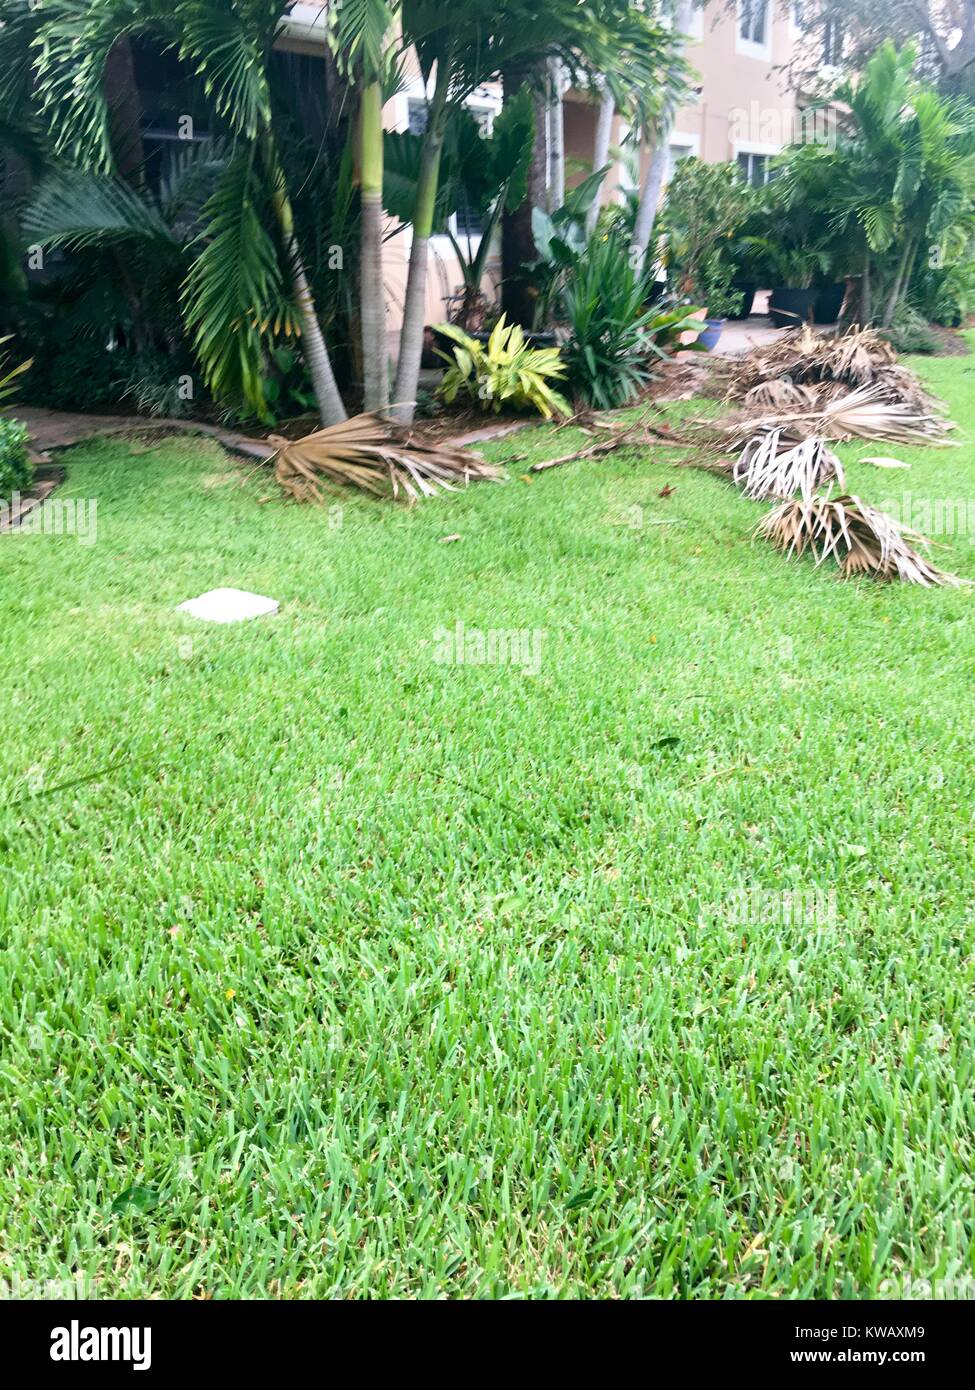 In the aftermath of Hurricane Matthew, debris litters a backyard in West Palm Beach, Florida, October 7, 2016. Stock Photo